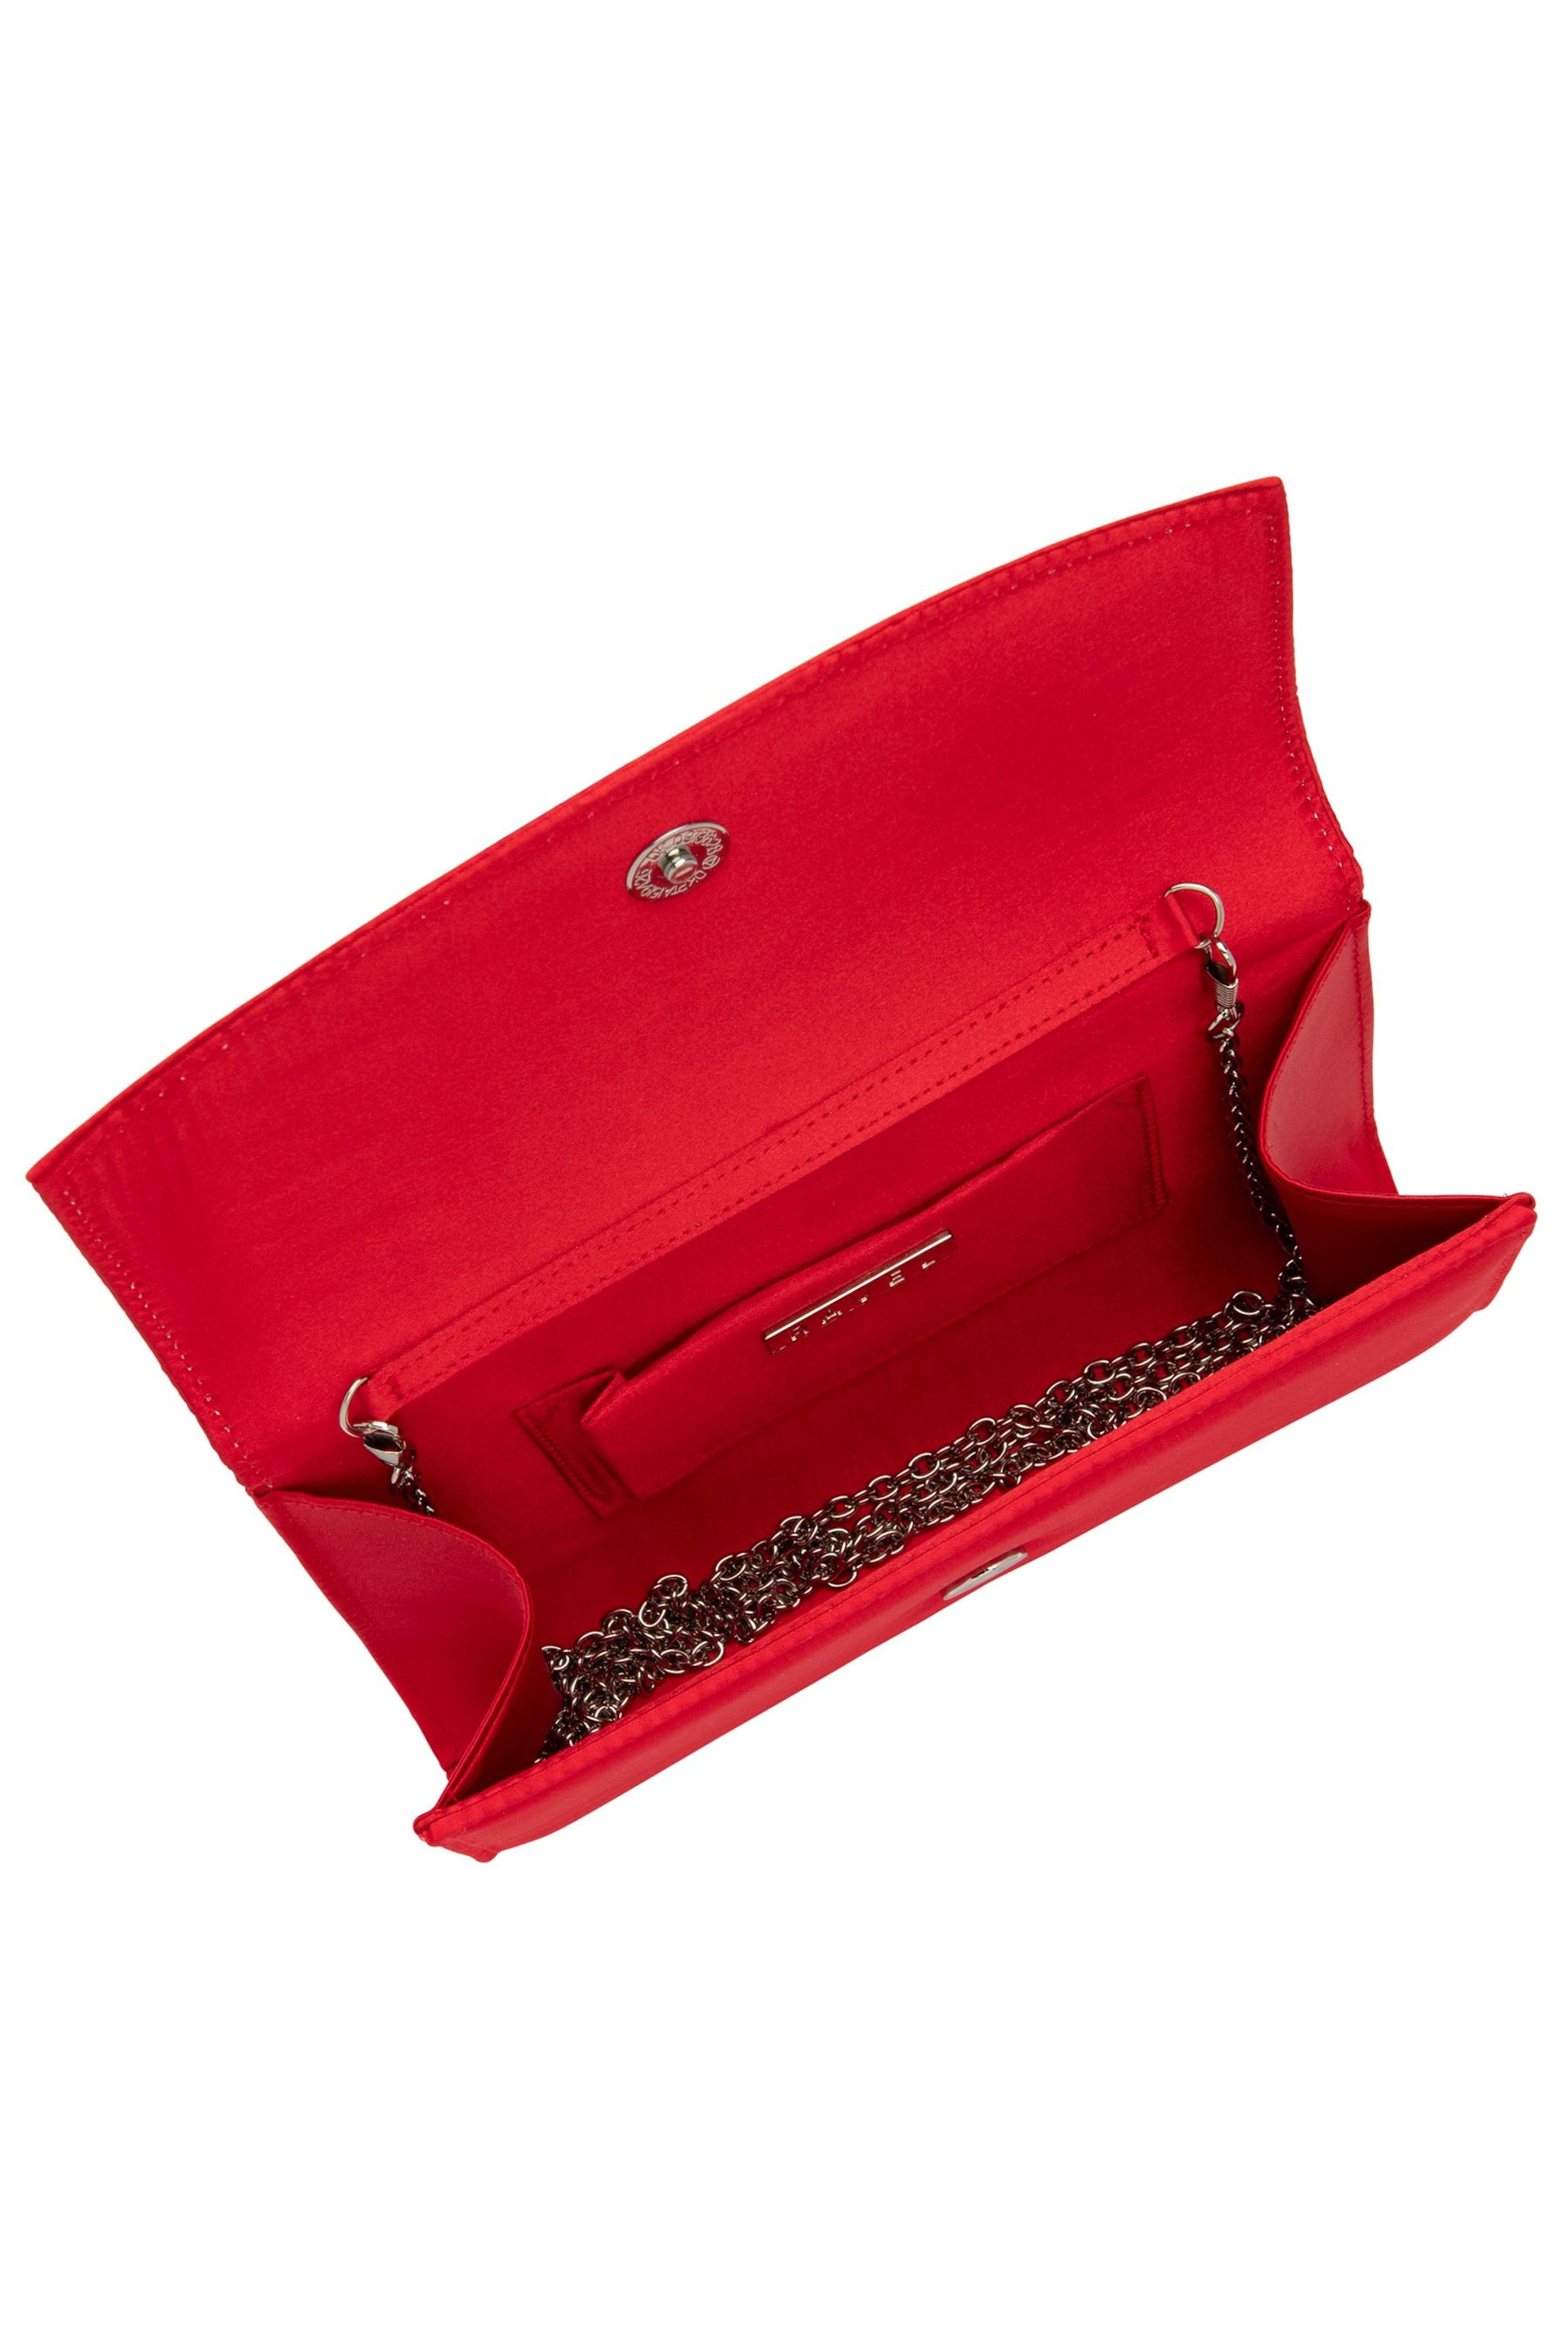 Ravel Red Clutch Bag with Chain - Image 4 of 4